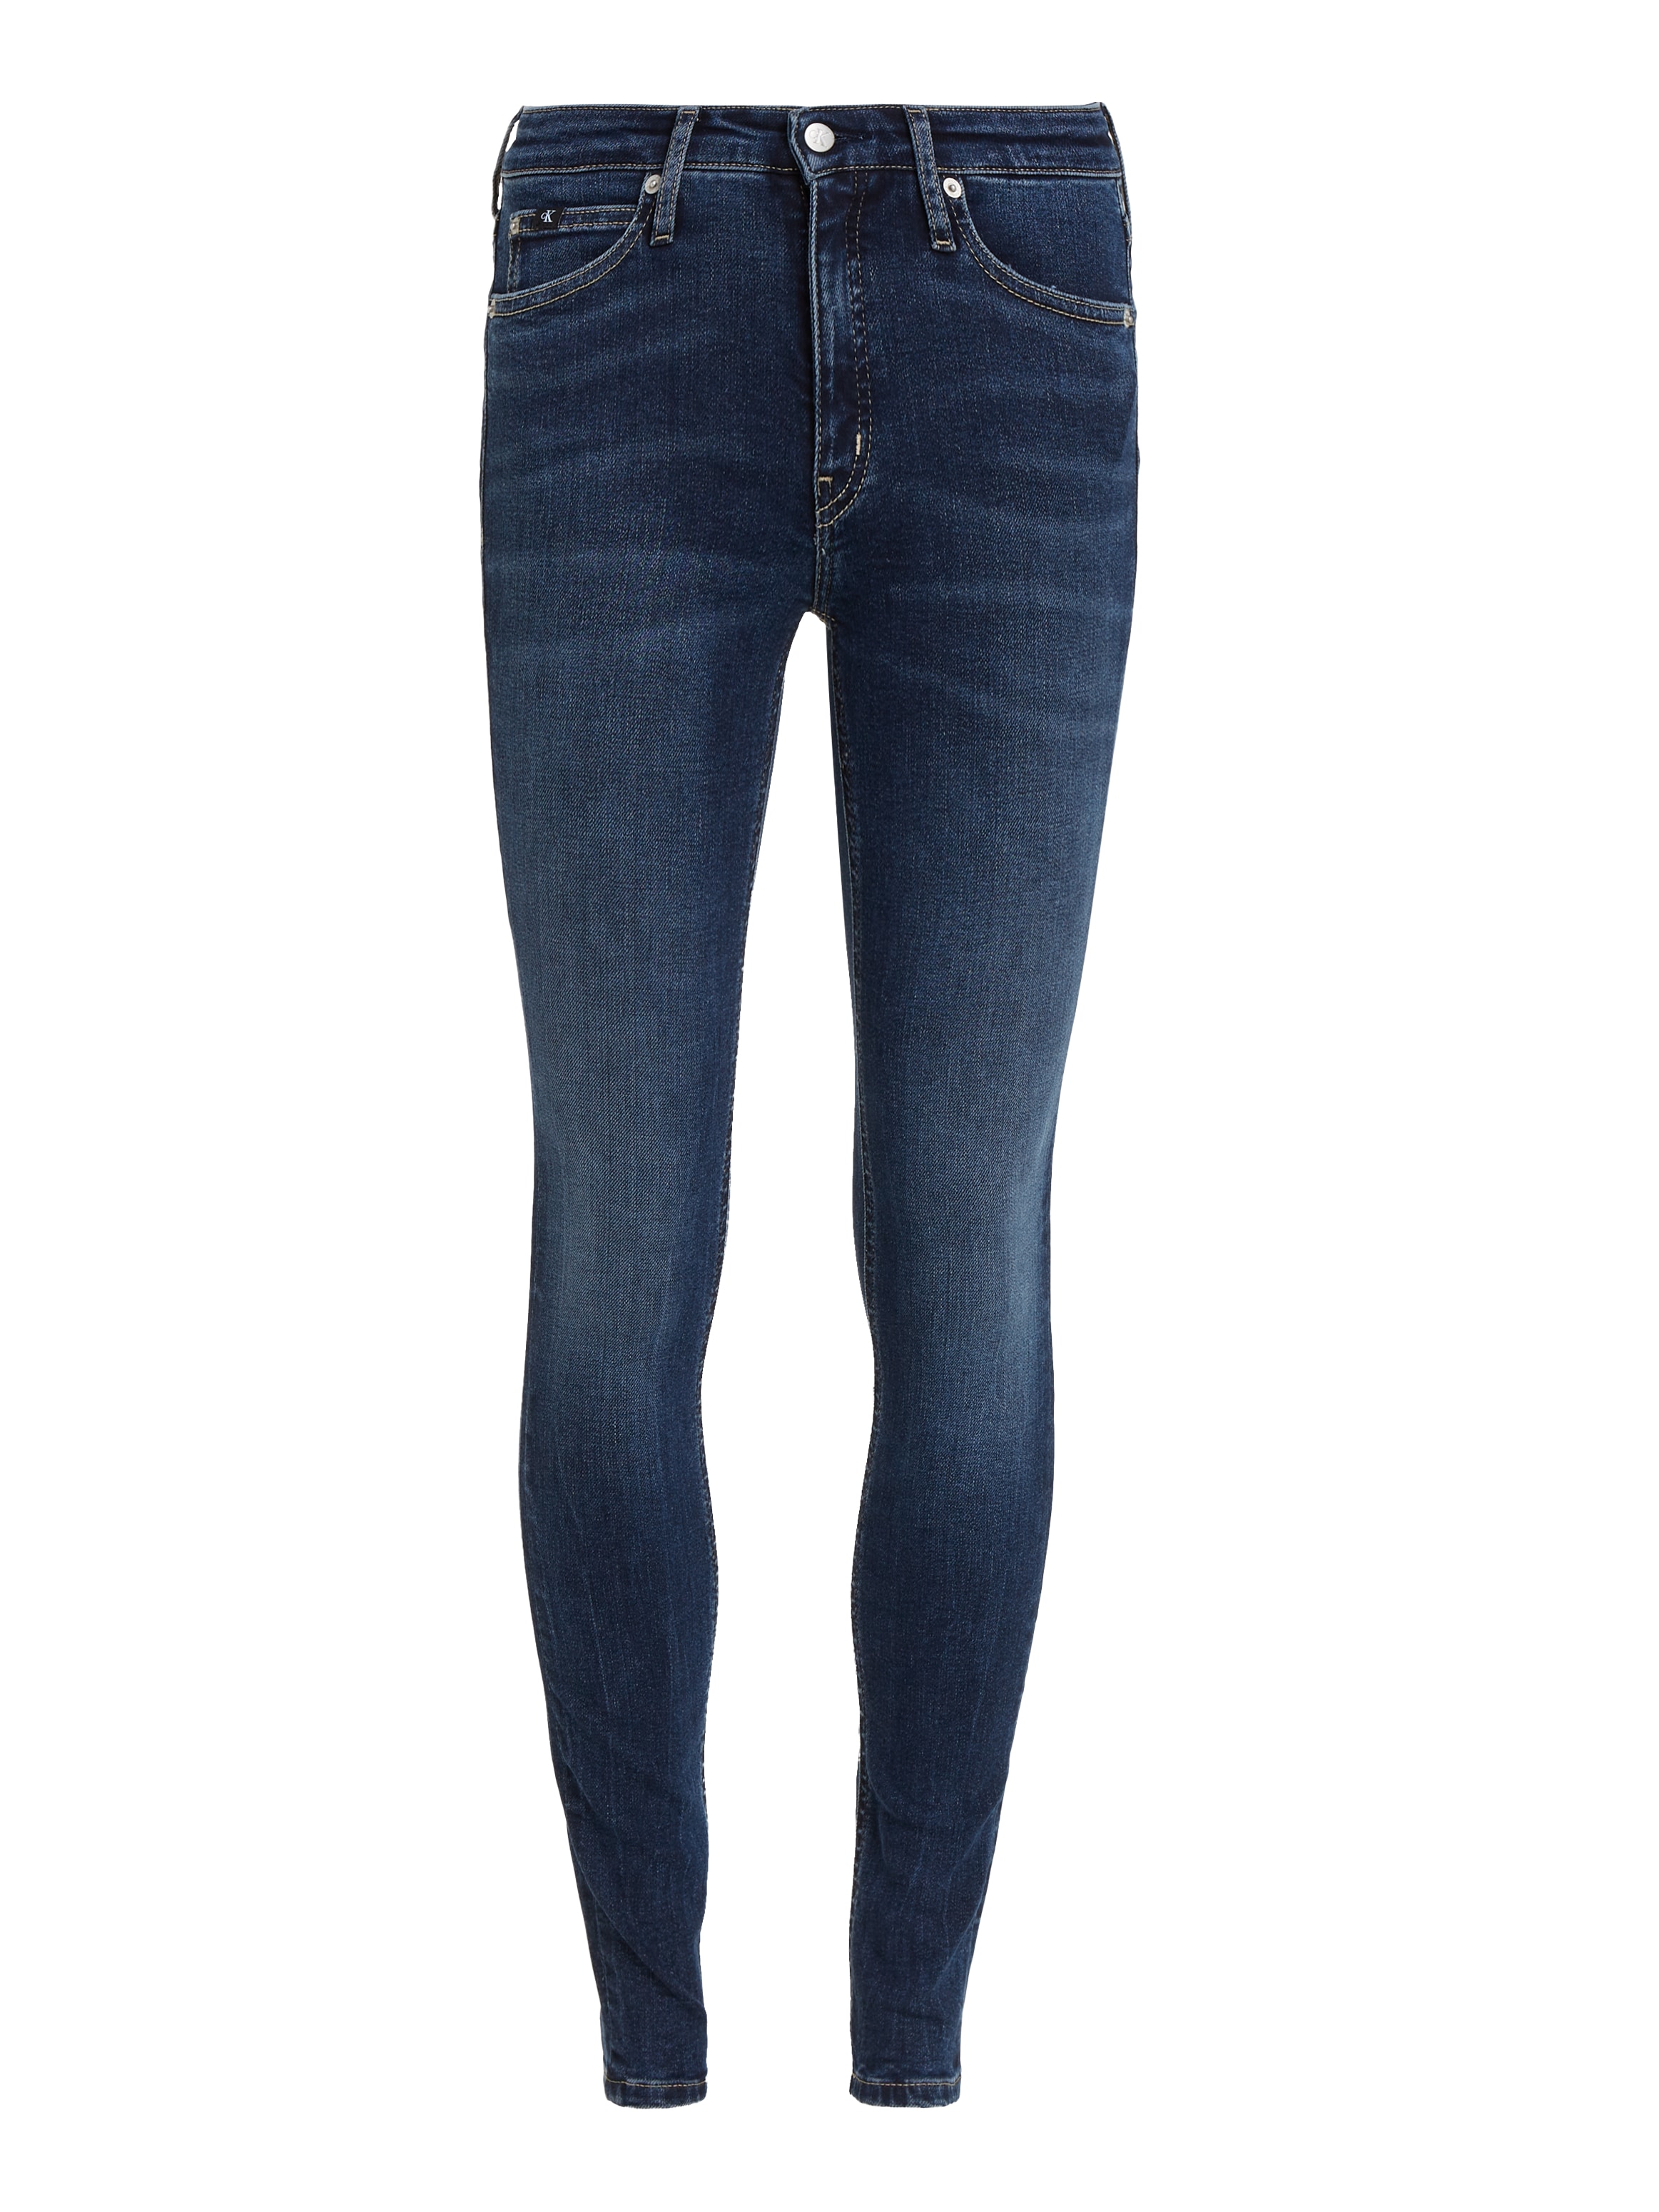 Klein Calvin SKINNY« Jeans RISE bei Skinny-fit-Jeans »MID ♕